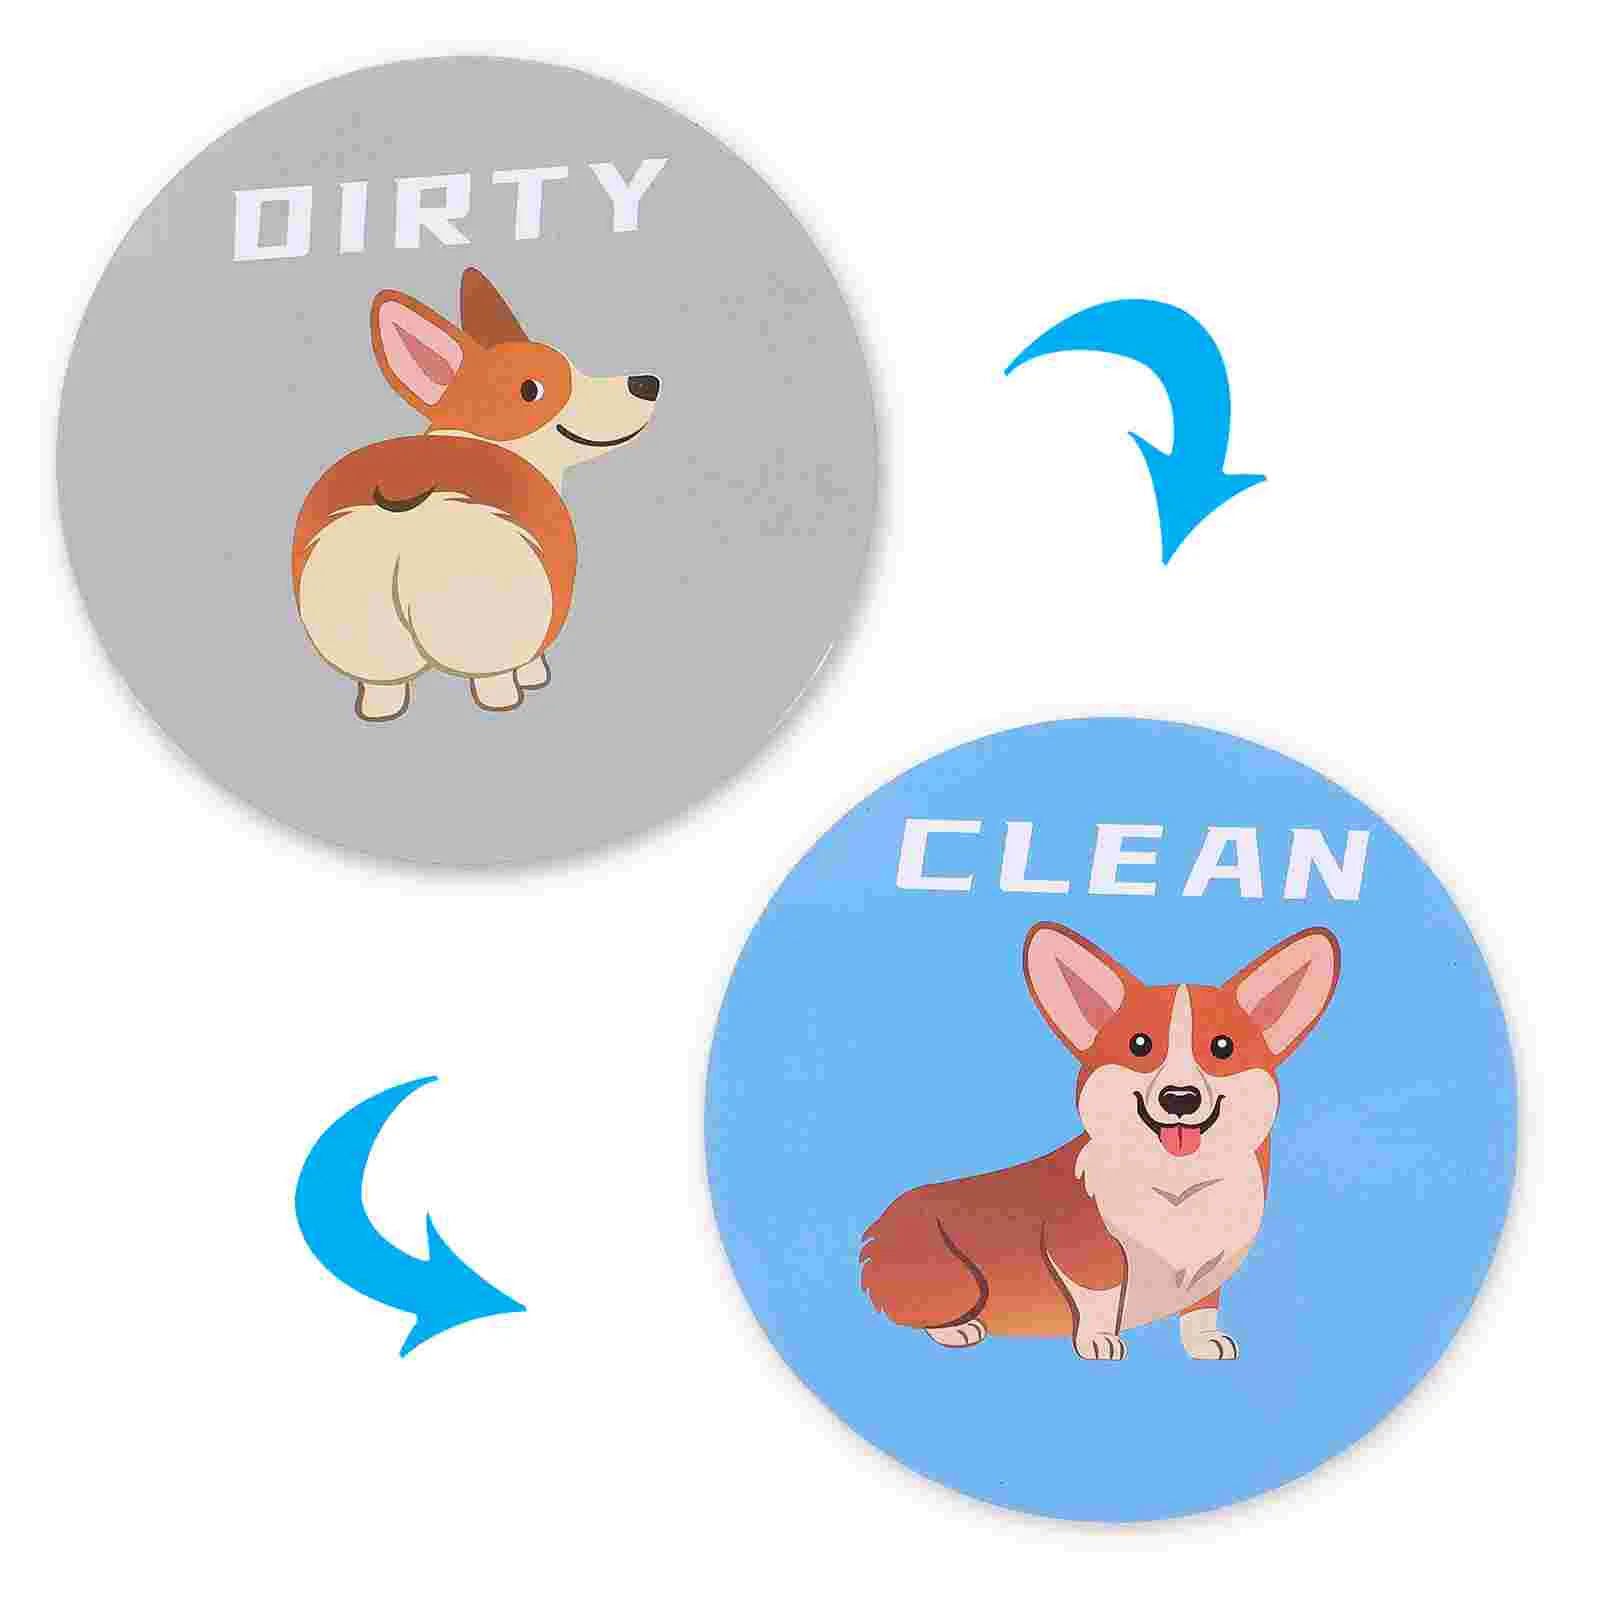 https://ae01.alicdn.com/kf/Sb2dc65c80db34a4094c706f3f5ae5ef8O/Refrigerator-Magnet-Dishwasher-Cleaning-Stickers-Kitchen-Necessities-Funny-Magnets-Apartment-Home-Clean-dirty-Sign-Accessories.jpg